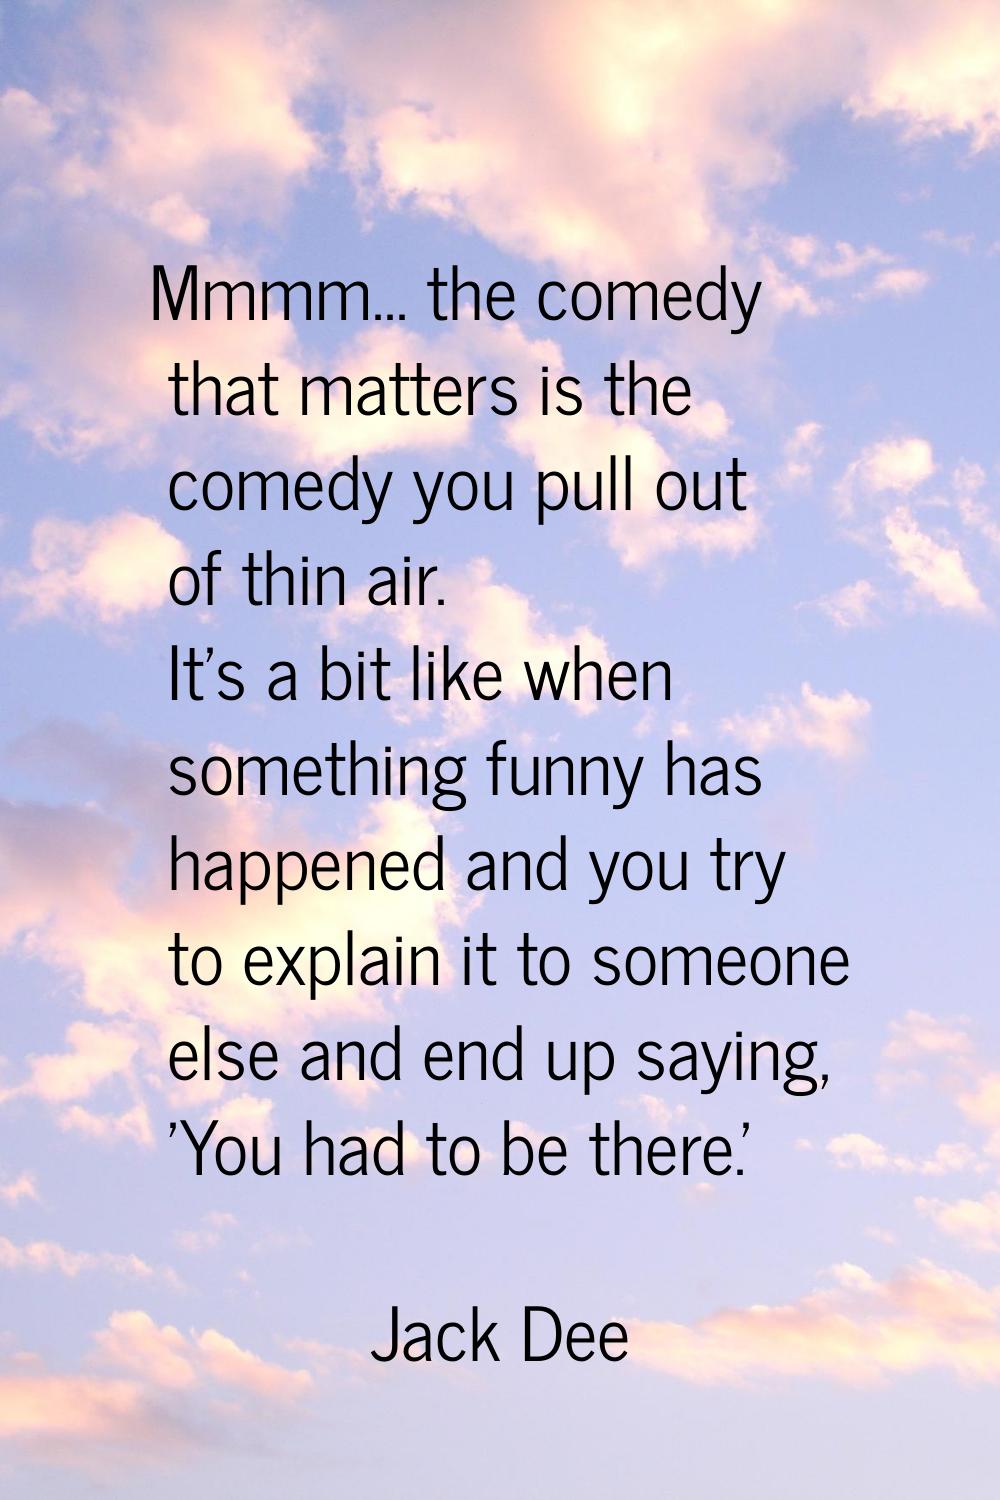 Mmmm... the comedy that matters is the comedy you pull out of thin air. It's a bit like when someth